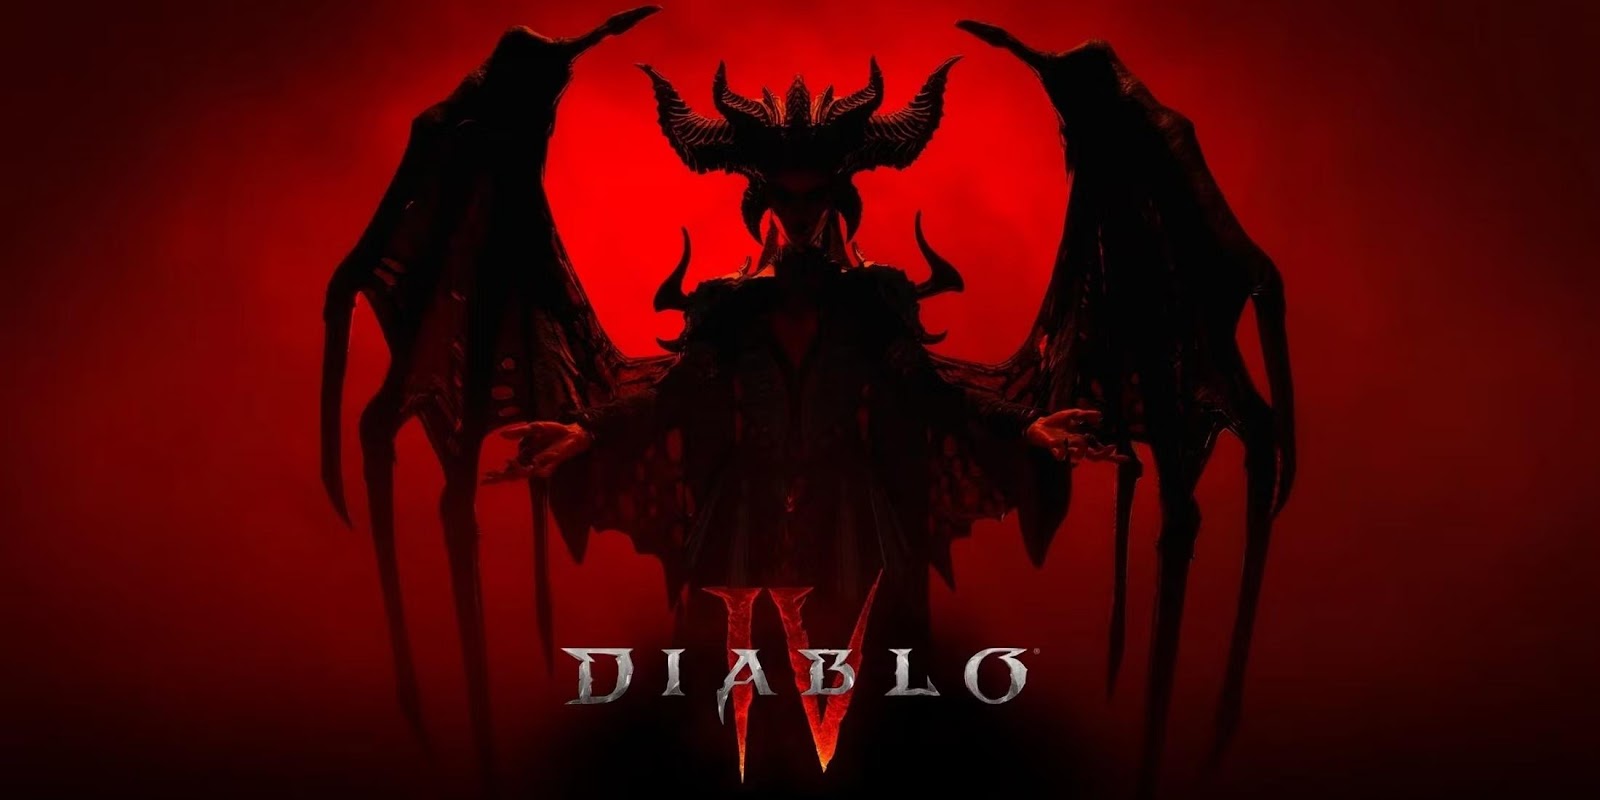 Uncover The New Contents That Will Be Introduced In Diablo 4 Season 5! – New Eternal Quest, Mode, Items And More